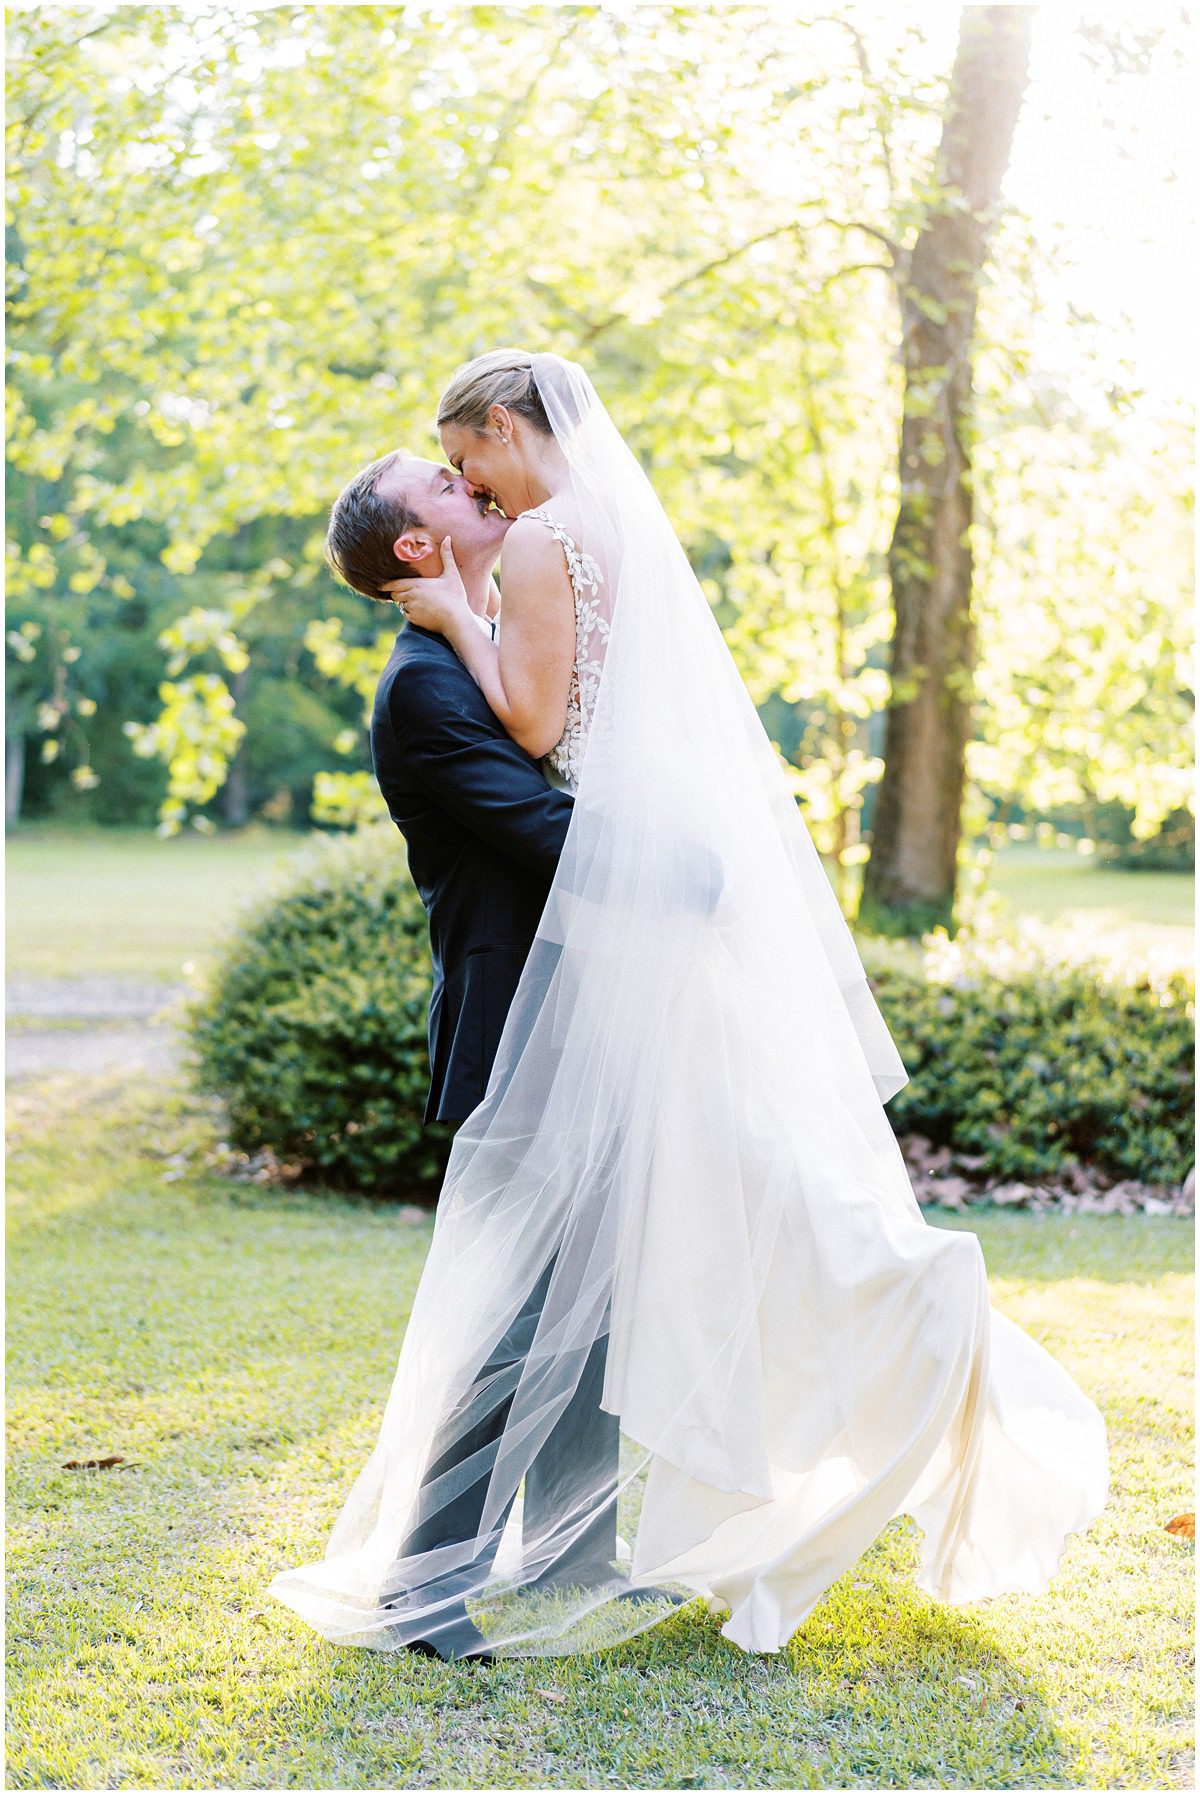 romantic wedding portrait of the groom picking up the bride and kissing her